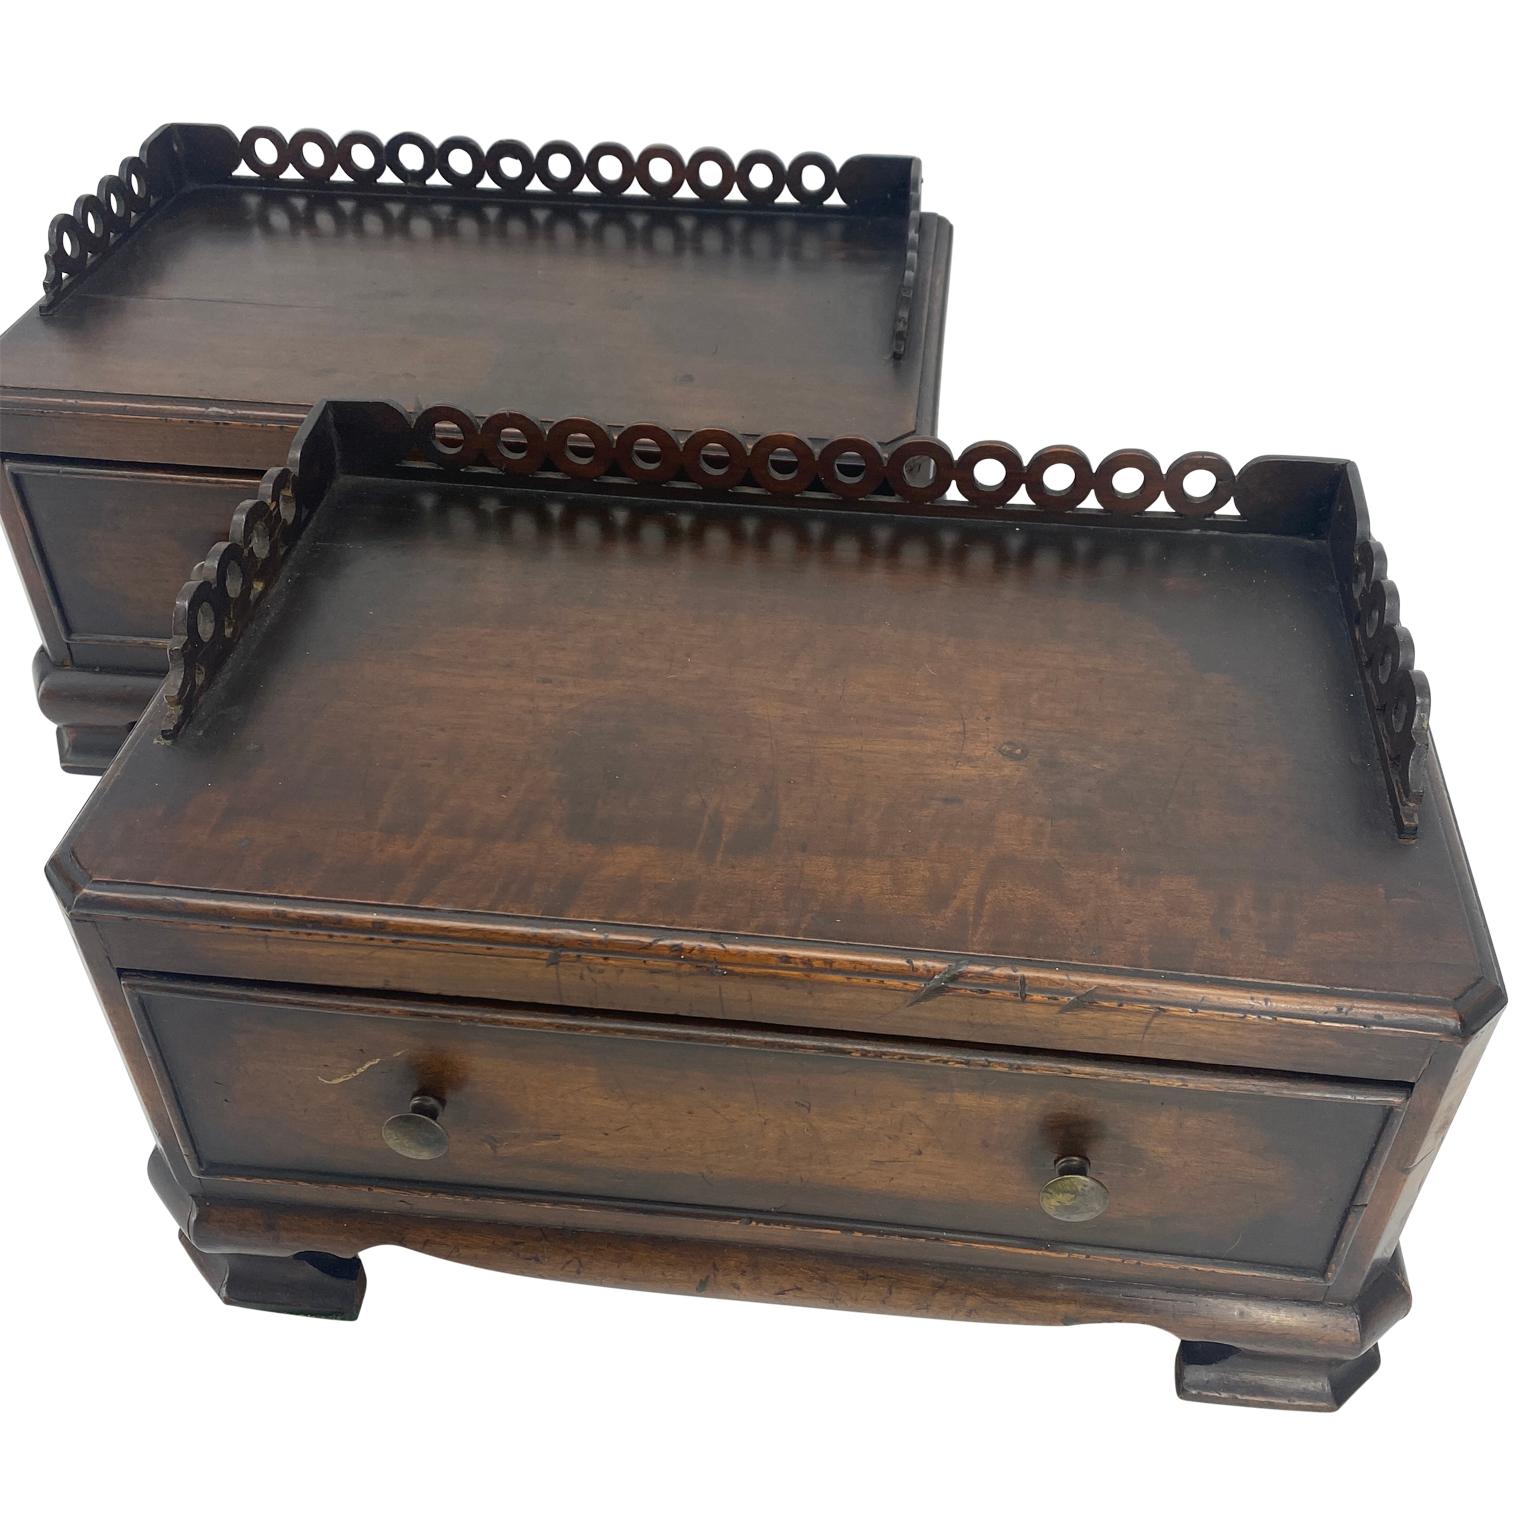 Two English late 19th century Victorian style mahogany jewelry boxes with one drawer and original brass hardware.
Please note that these two boxes are priced and sold individually. Both can be sold together as a pair at 25% discounted price.